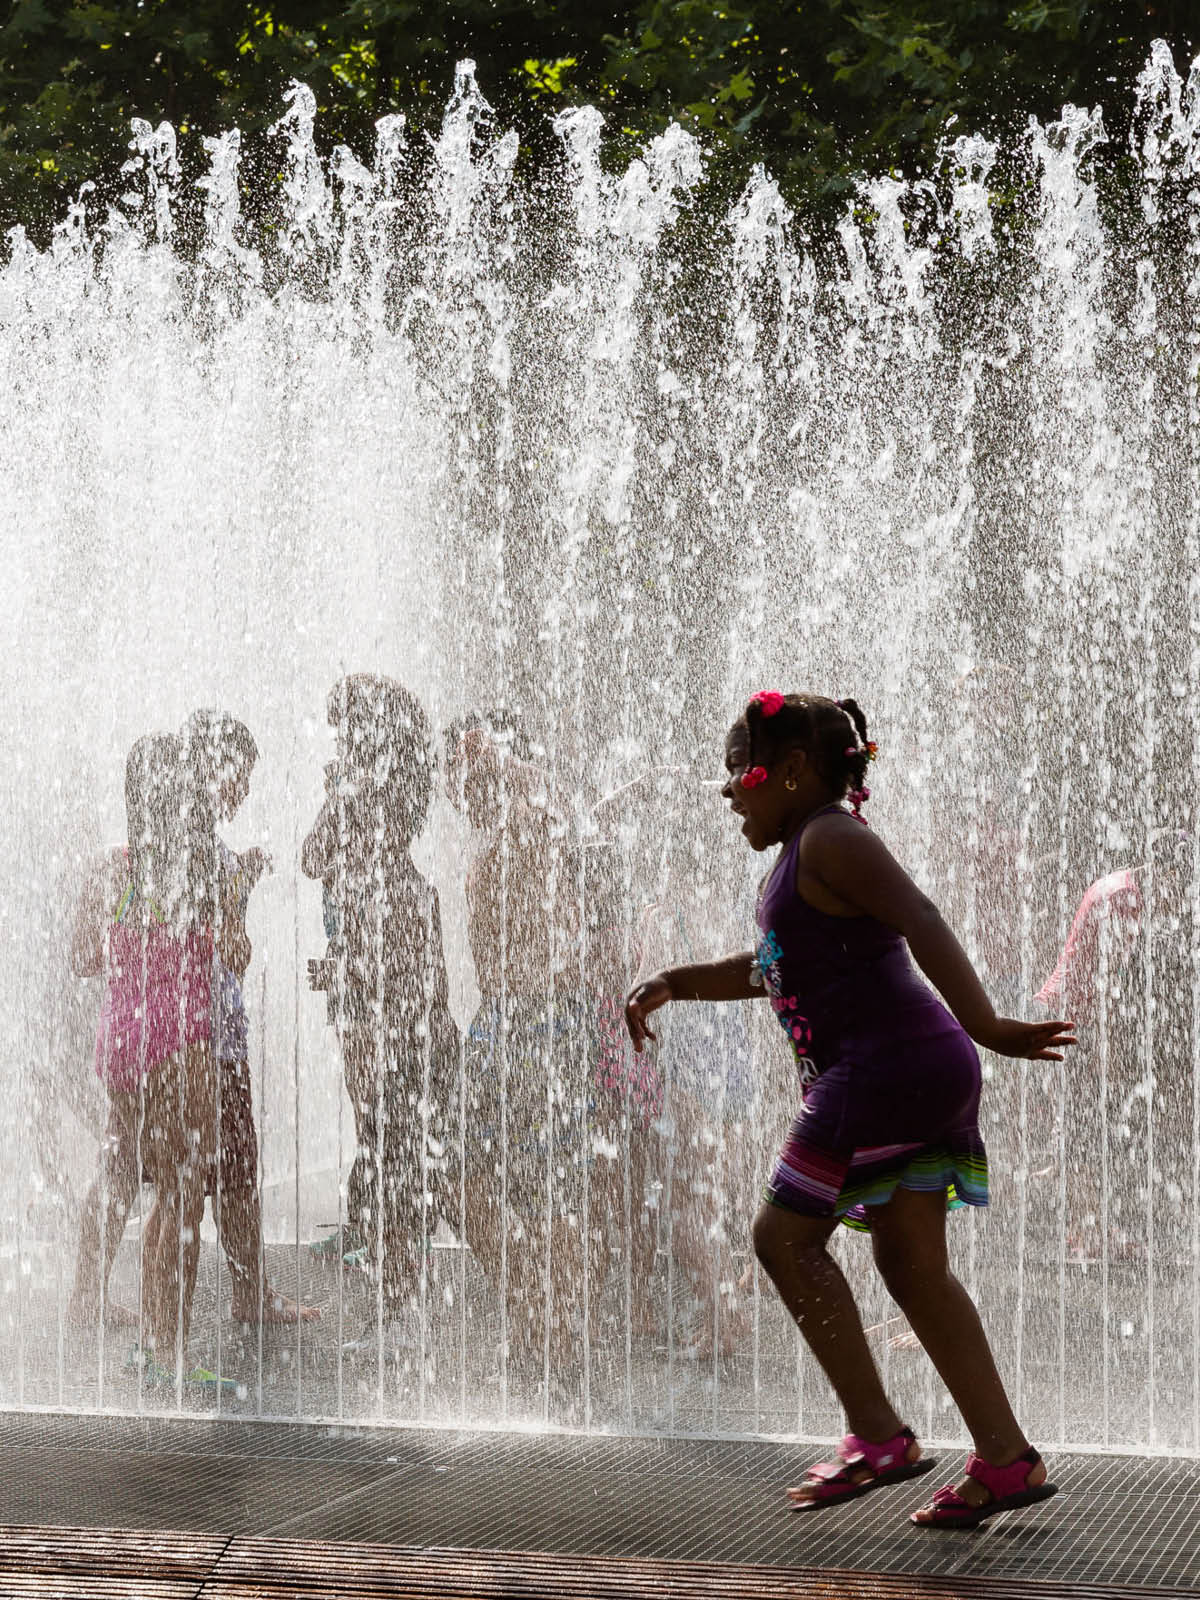 Children running through jets of water on a sunny day.